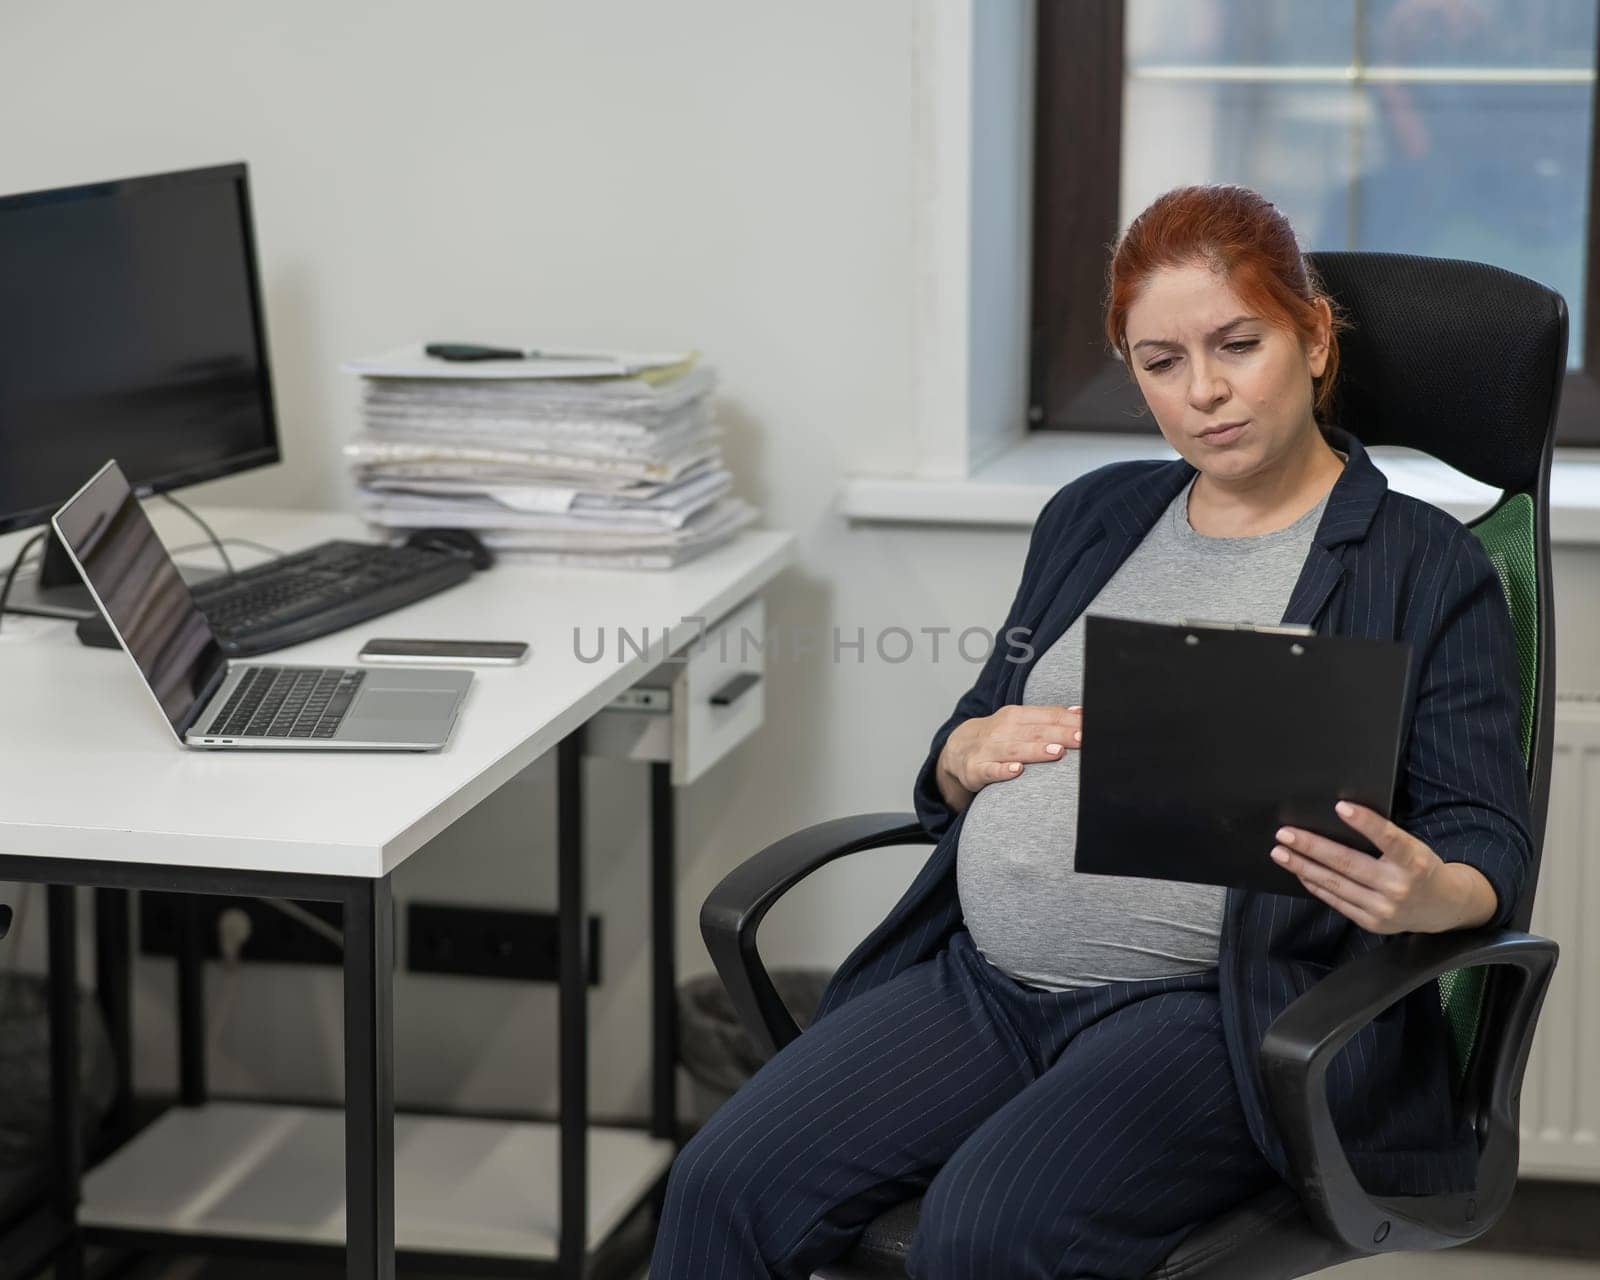 Pregnant woman reading documents on a paper tablet in the office. by mrwed54